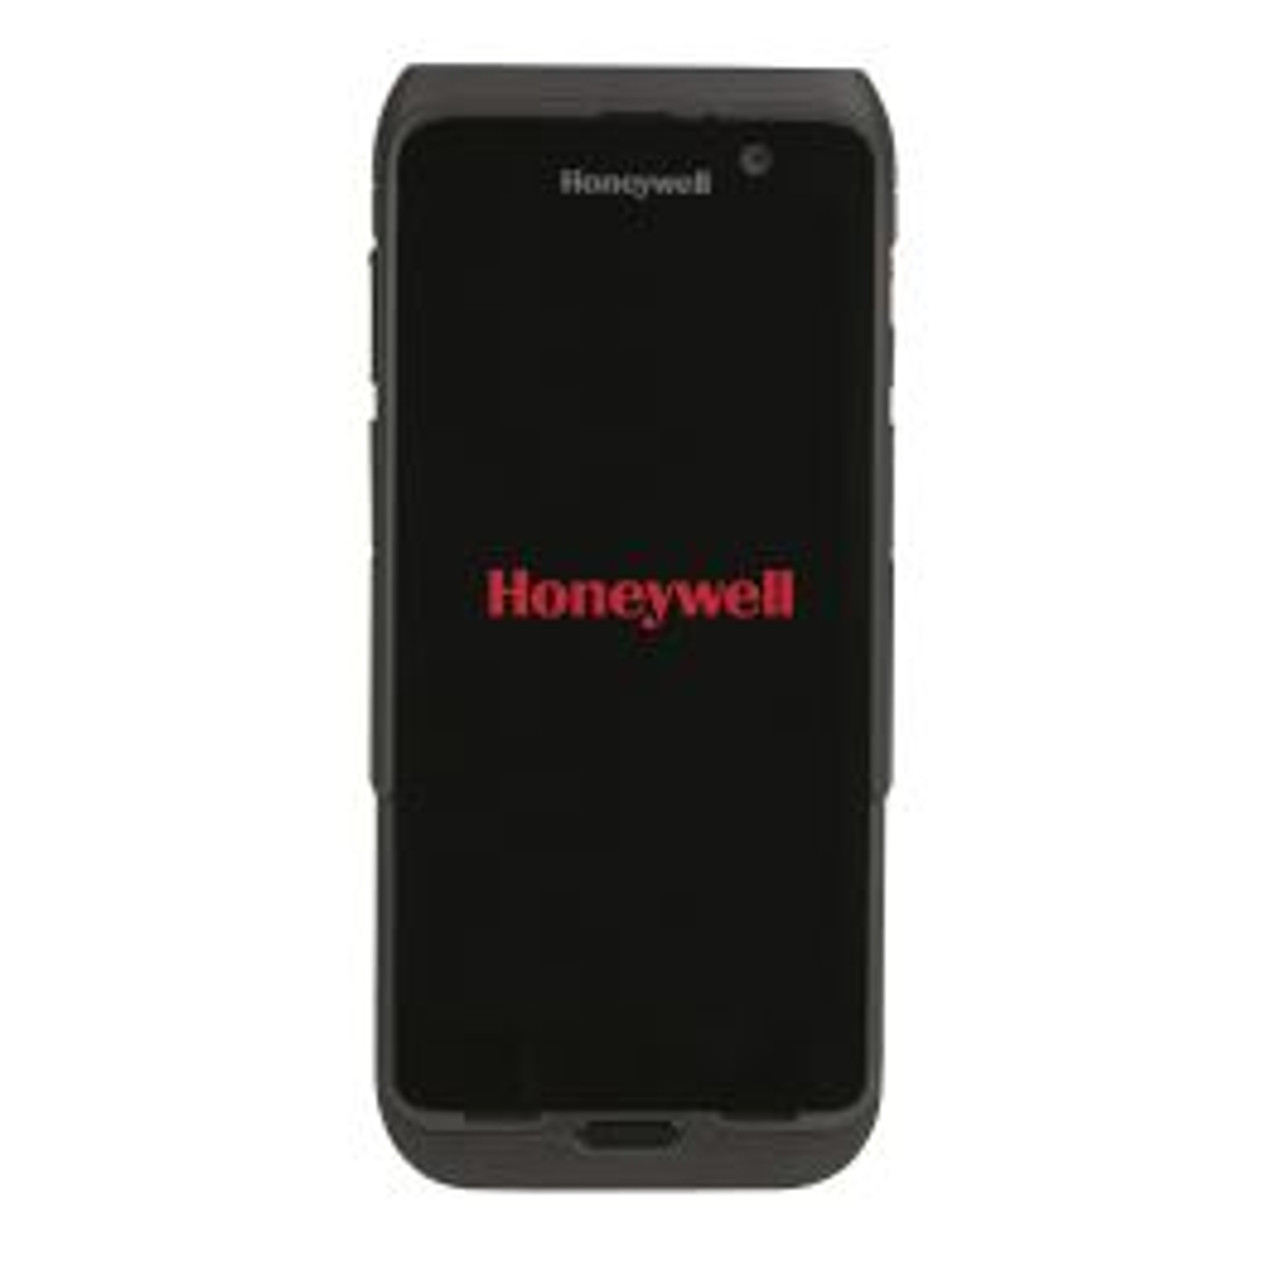 Honeywell CT47 Ultra-Rugged Mobile Computer - 1D, 2D - 4G, 4G LTE, 5G, 3G, 2G, LTE, UMTS, HSPA+ - 78.74 ft - S0703Scan Engine - Qualcomm 2.70 GHz - 8 GB RAM - 128 GB Flash - 5.5" Full HD Touchscreen - LED